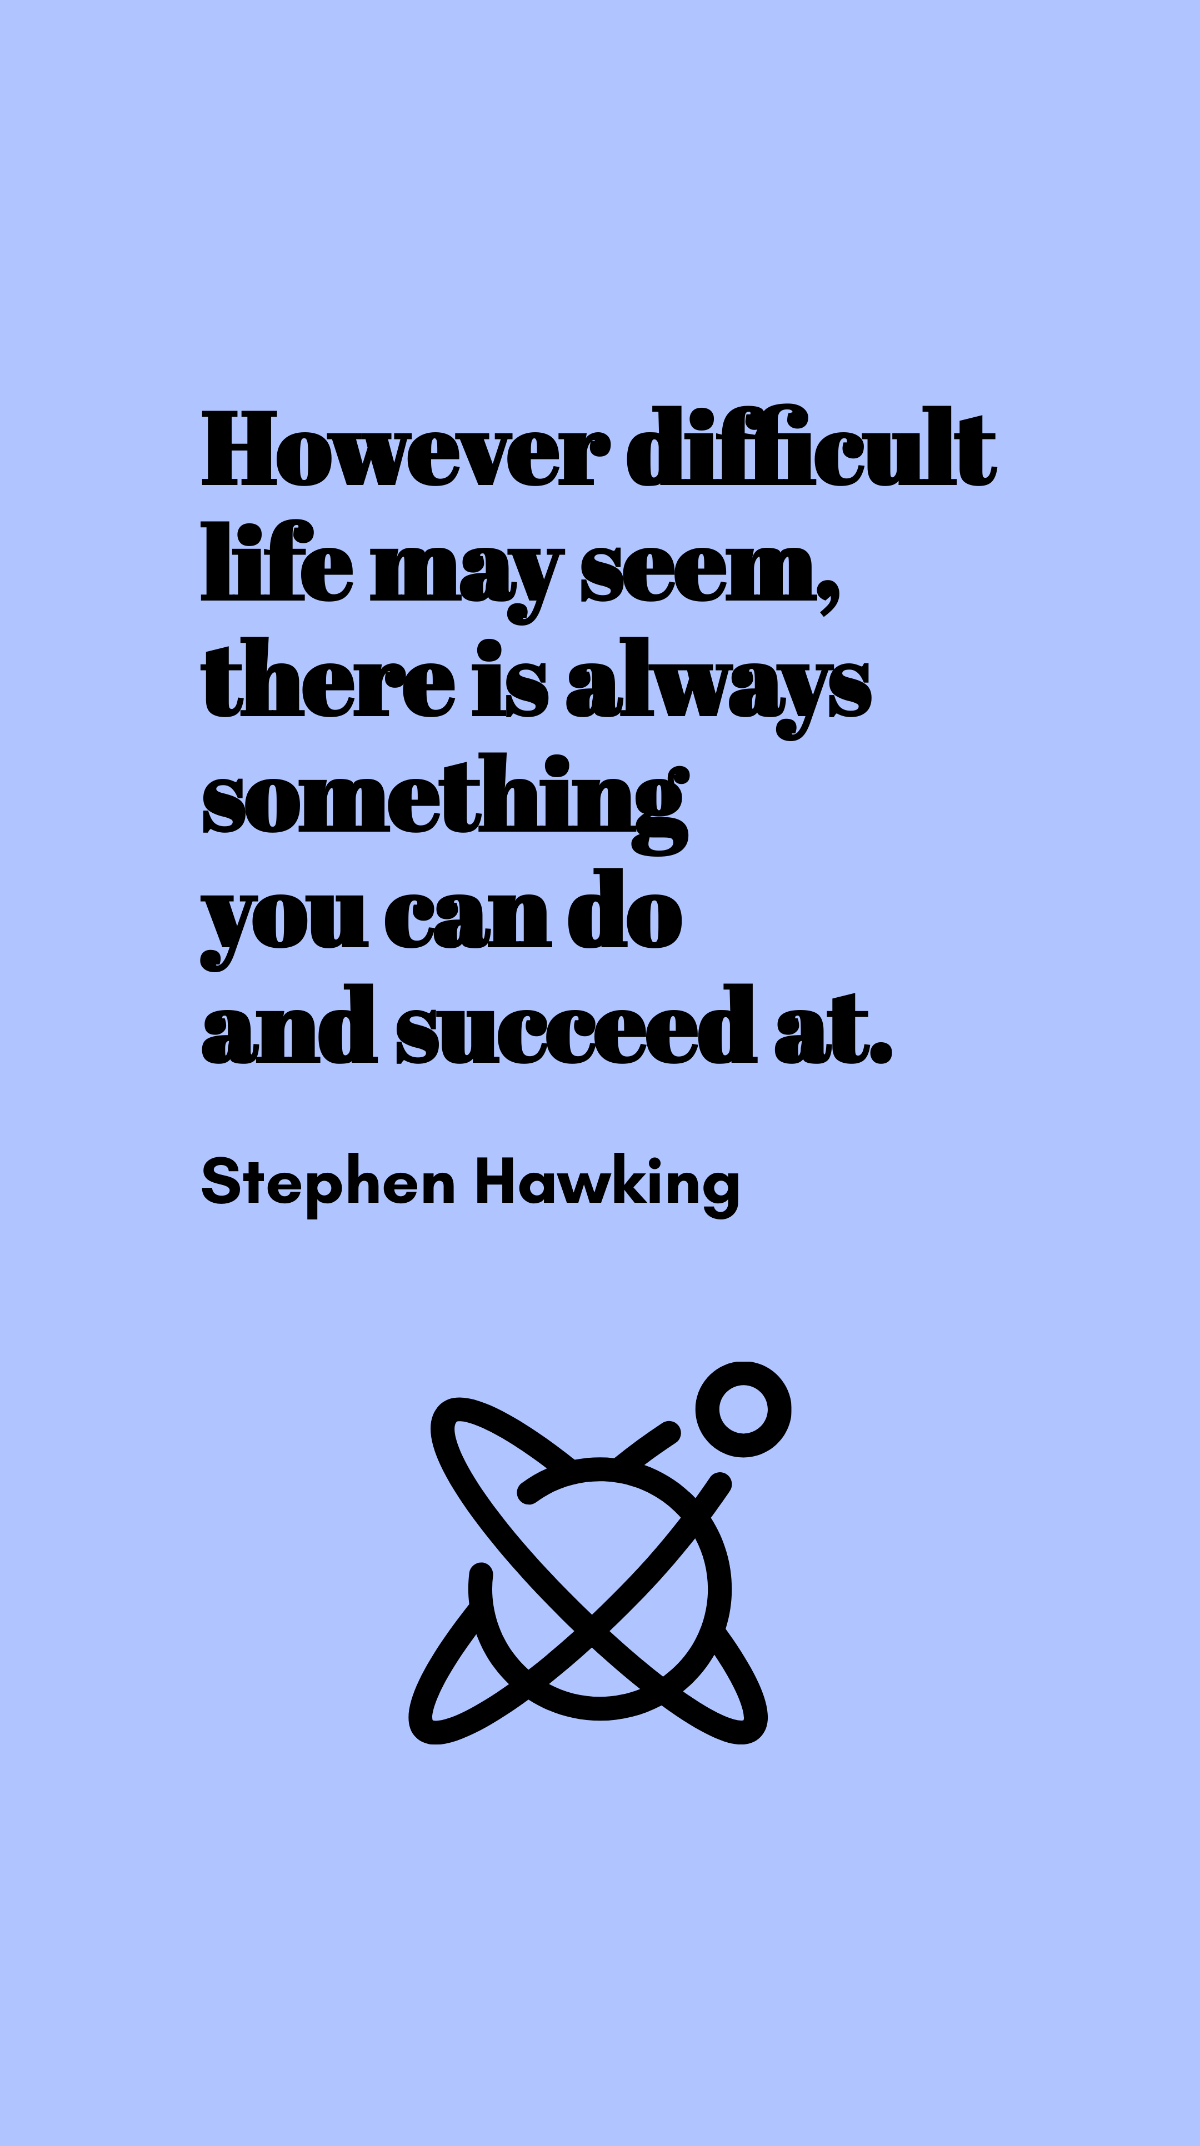 Stephen Hawking - However difficult life may seem, there is always something you can do and succeed at. Template